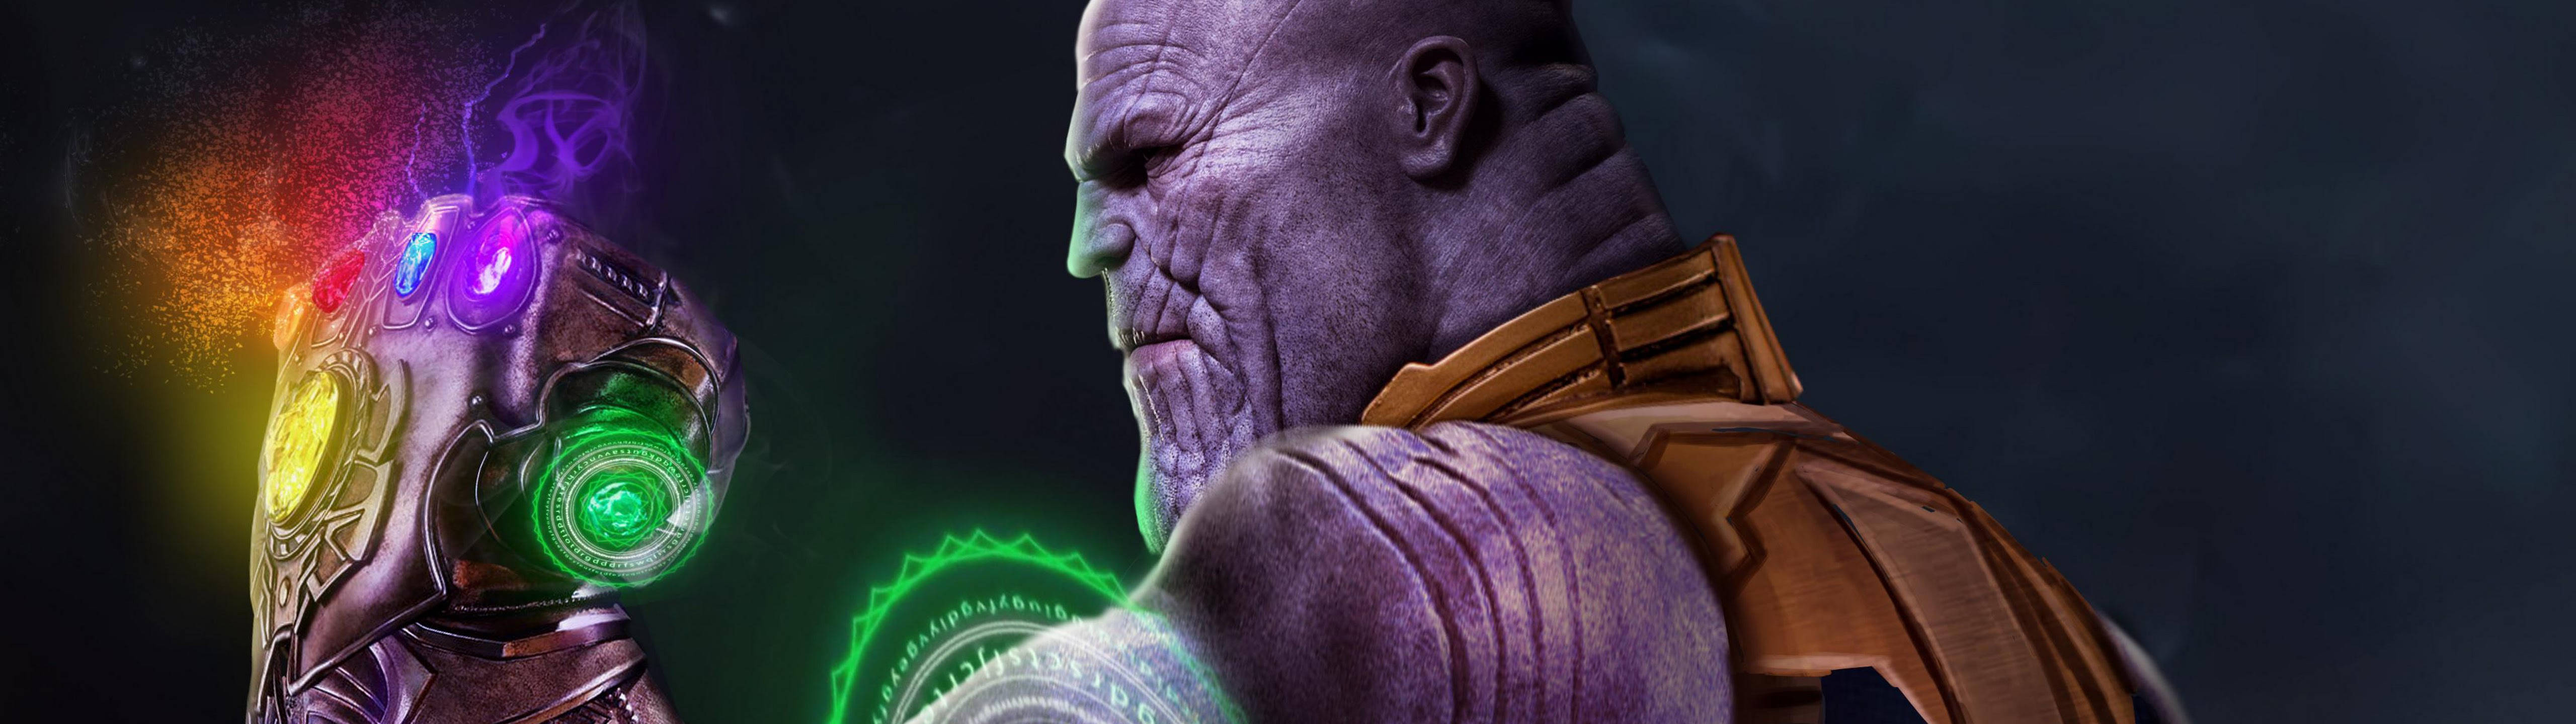 Marvel's Thanos With Infinity Gauntlet 5120 X 1440 Background